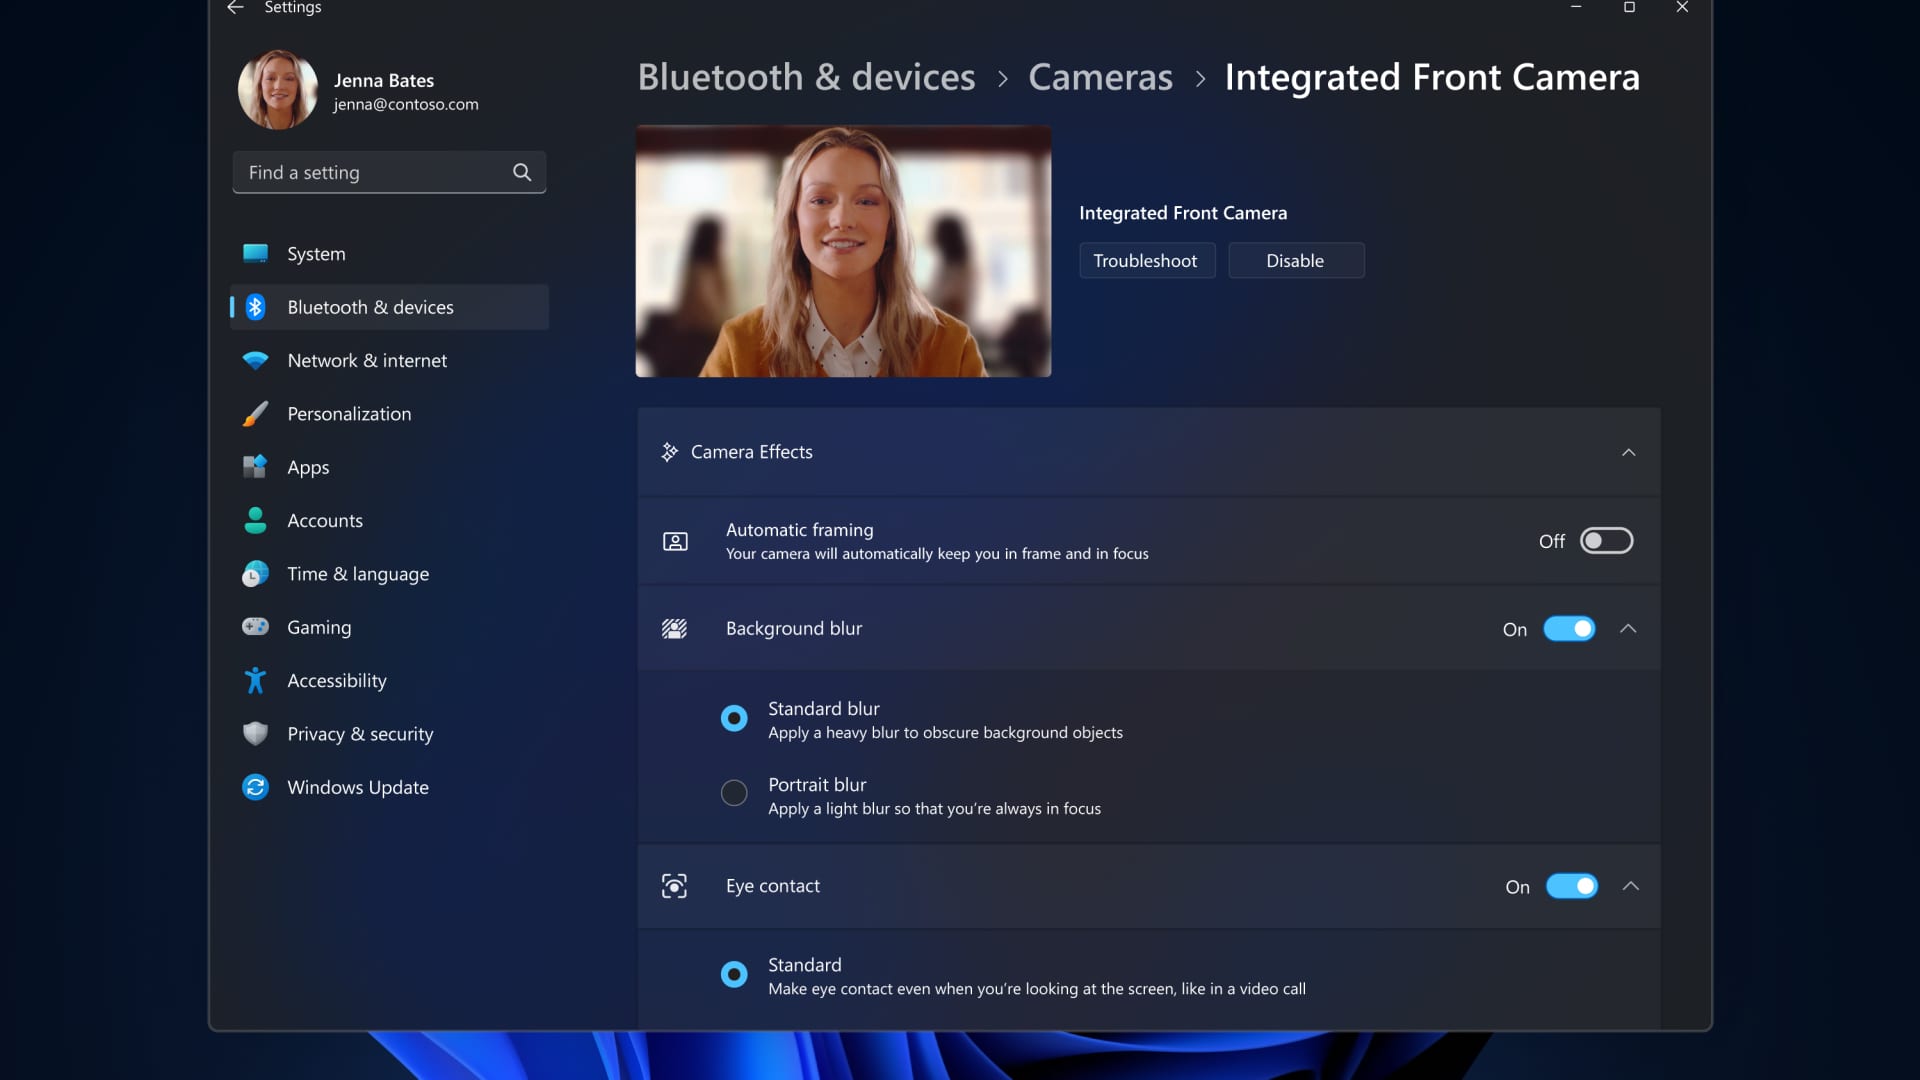 If you have a compatible PC, Windows 11 can make it look like you're always making eye contact on video calls.